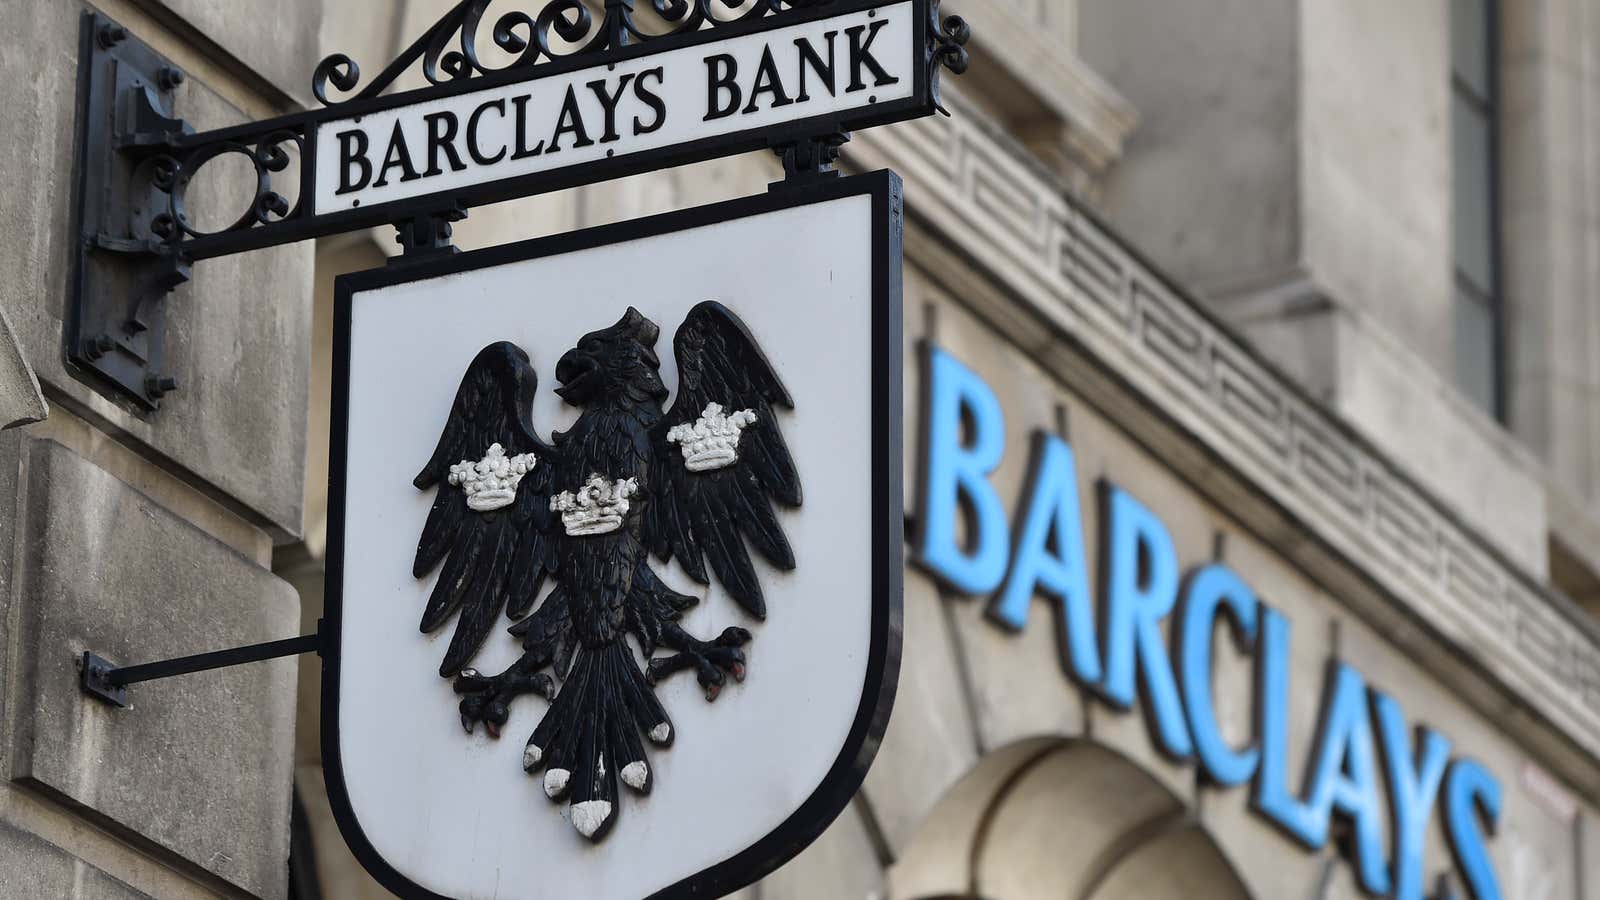 Barclays’ century-long relationship with Africa is about to end.